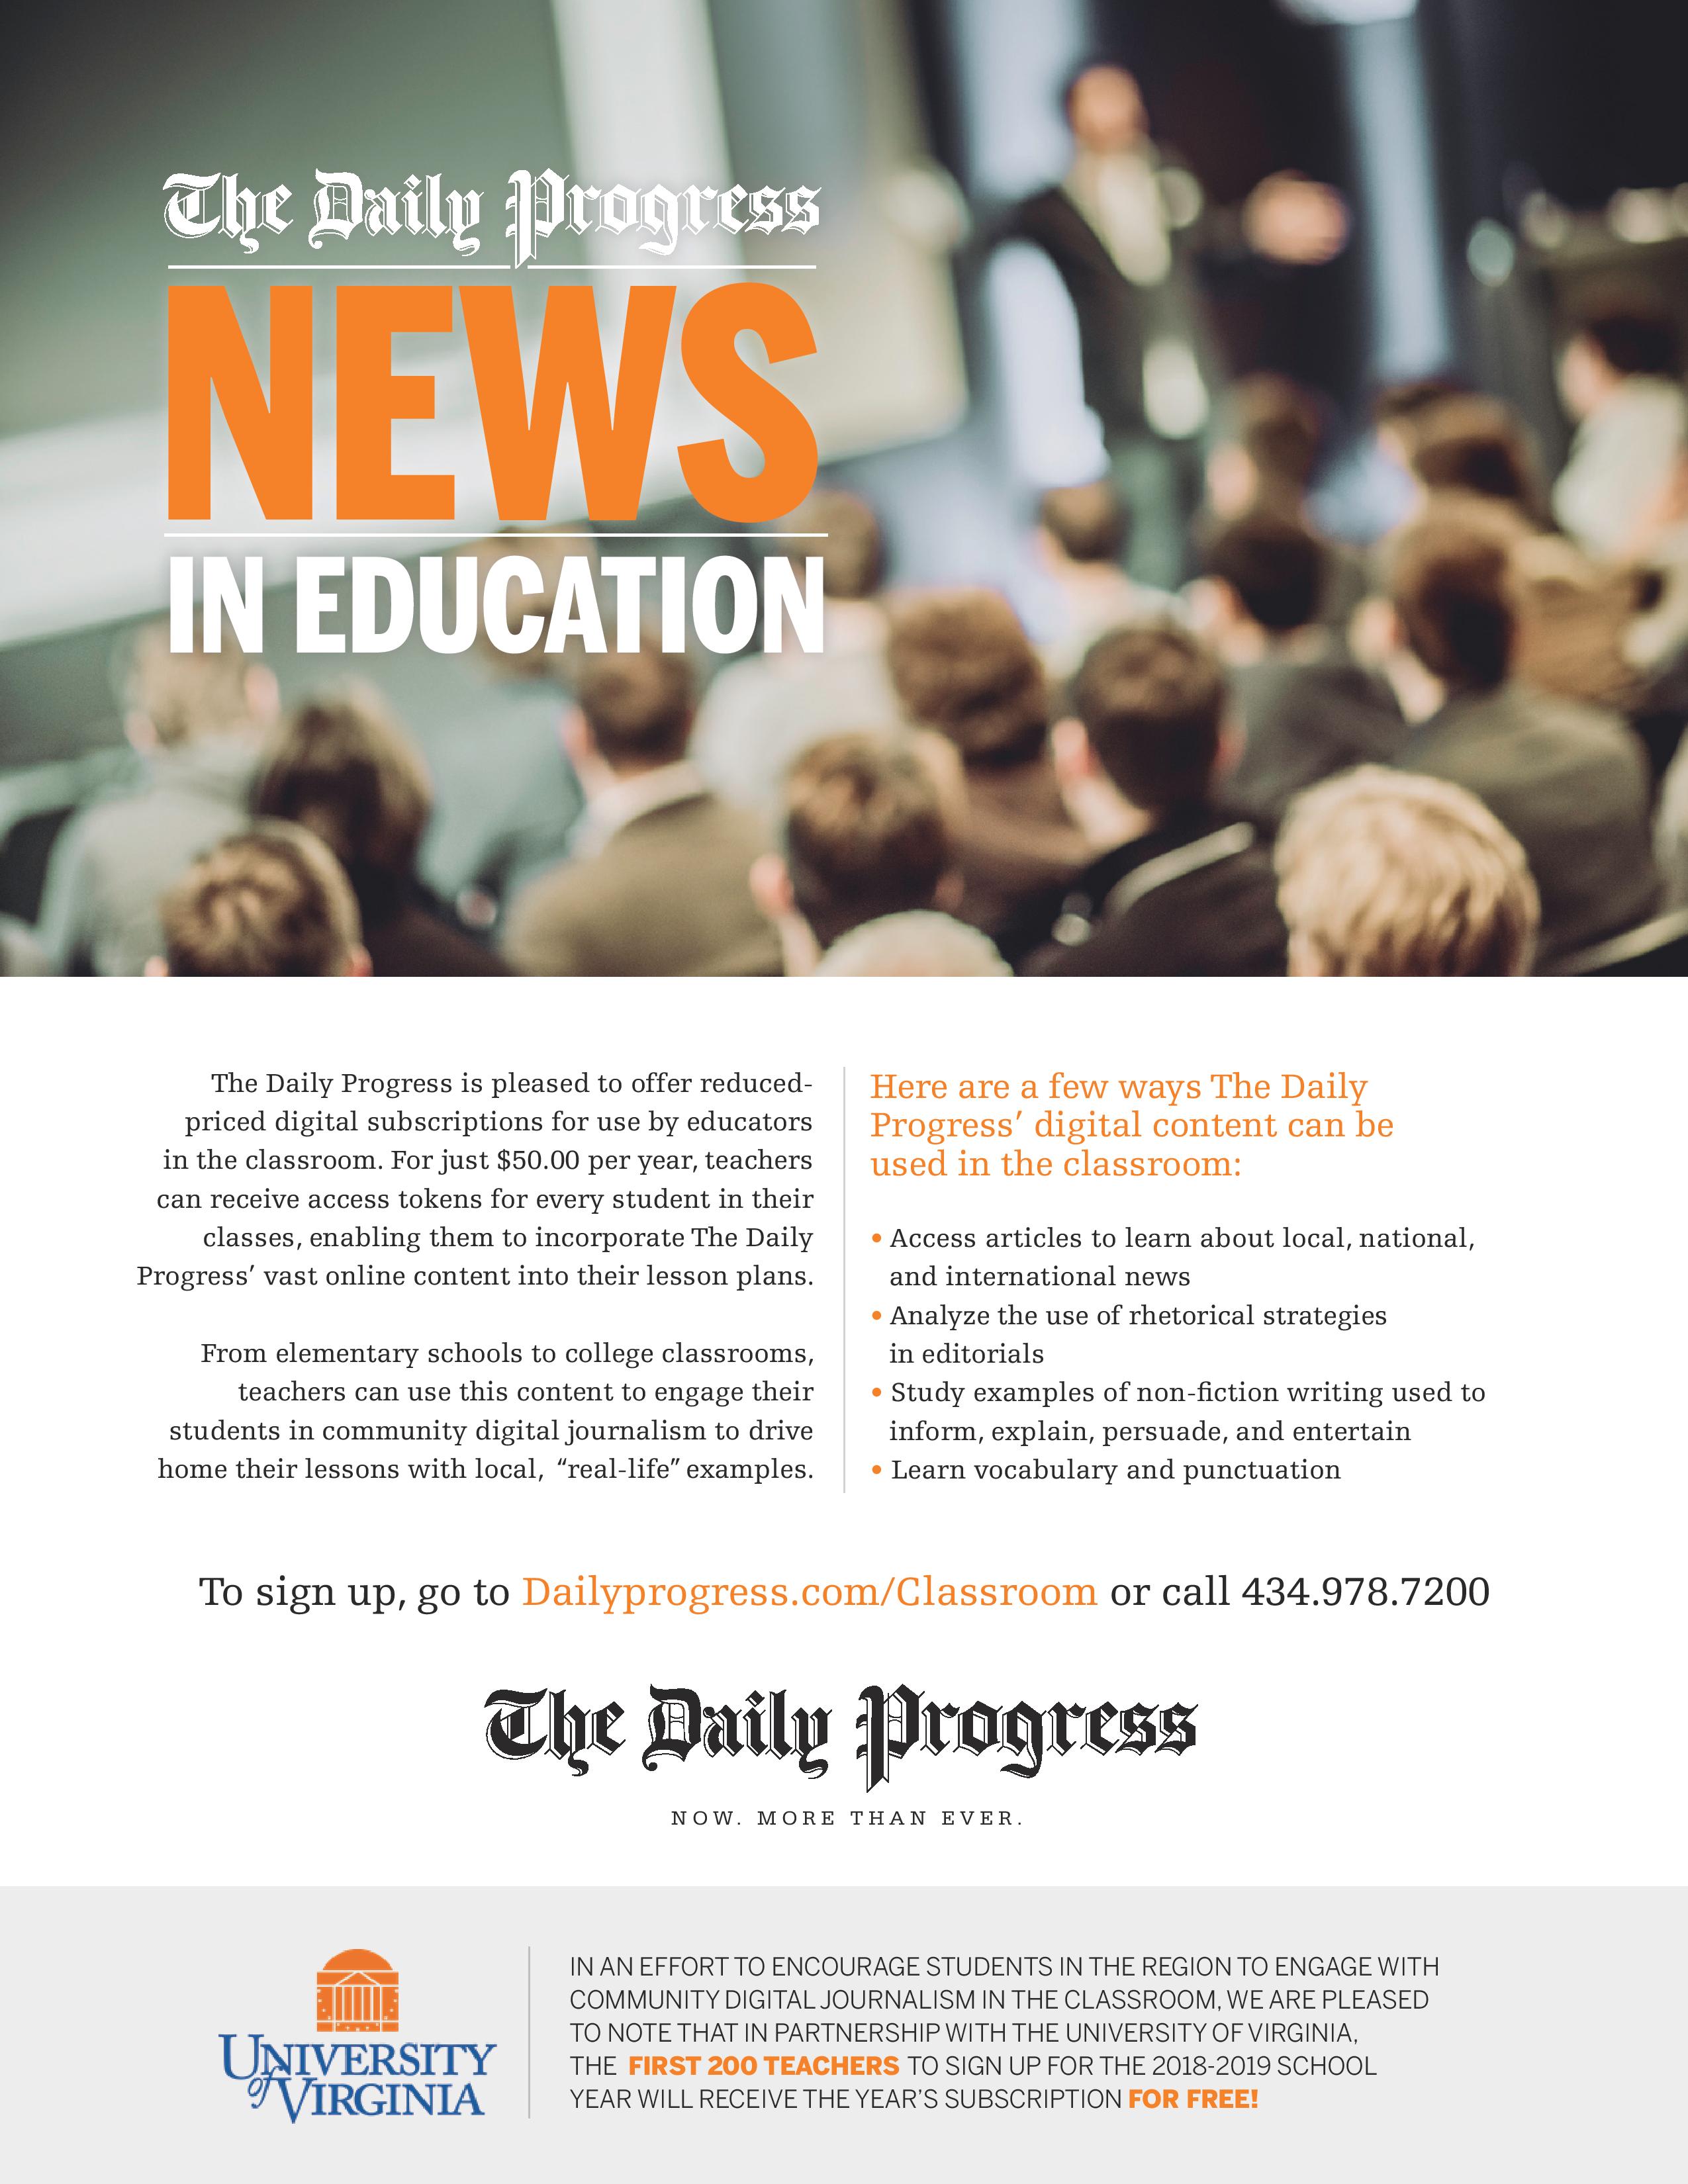 recent news articles on education